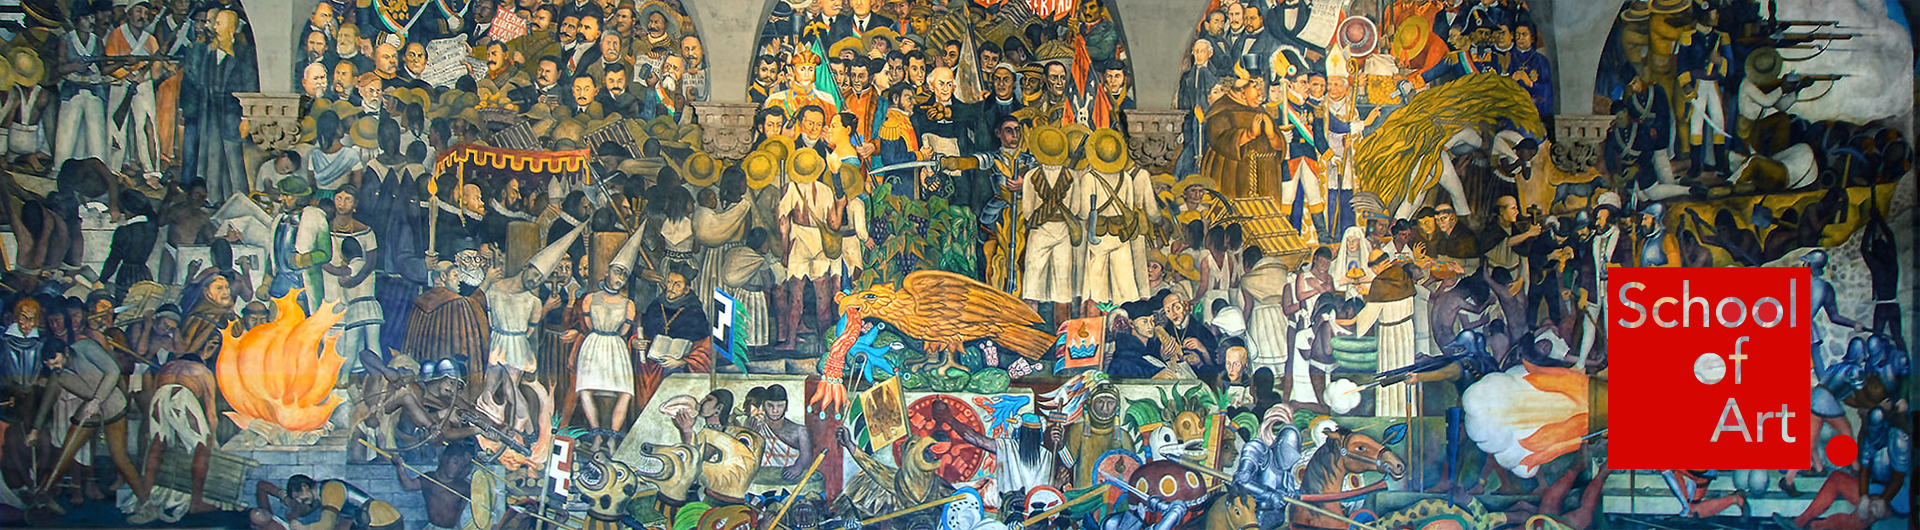 Large fresco on a wall by Mexican artist Diego Rivera